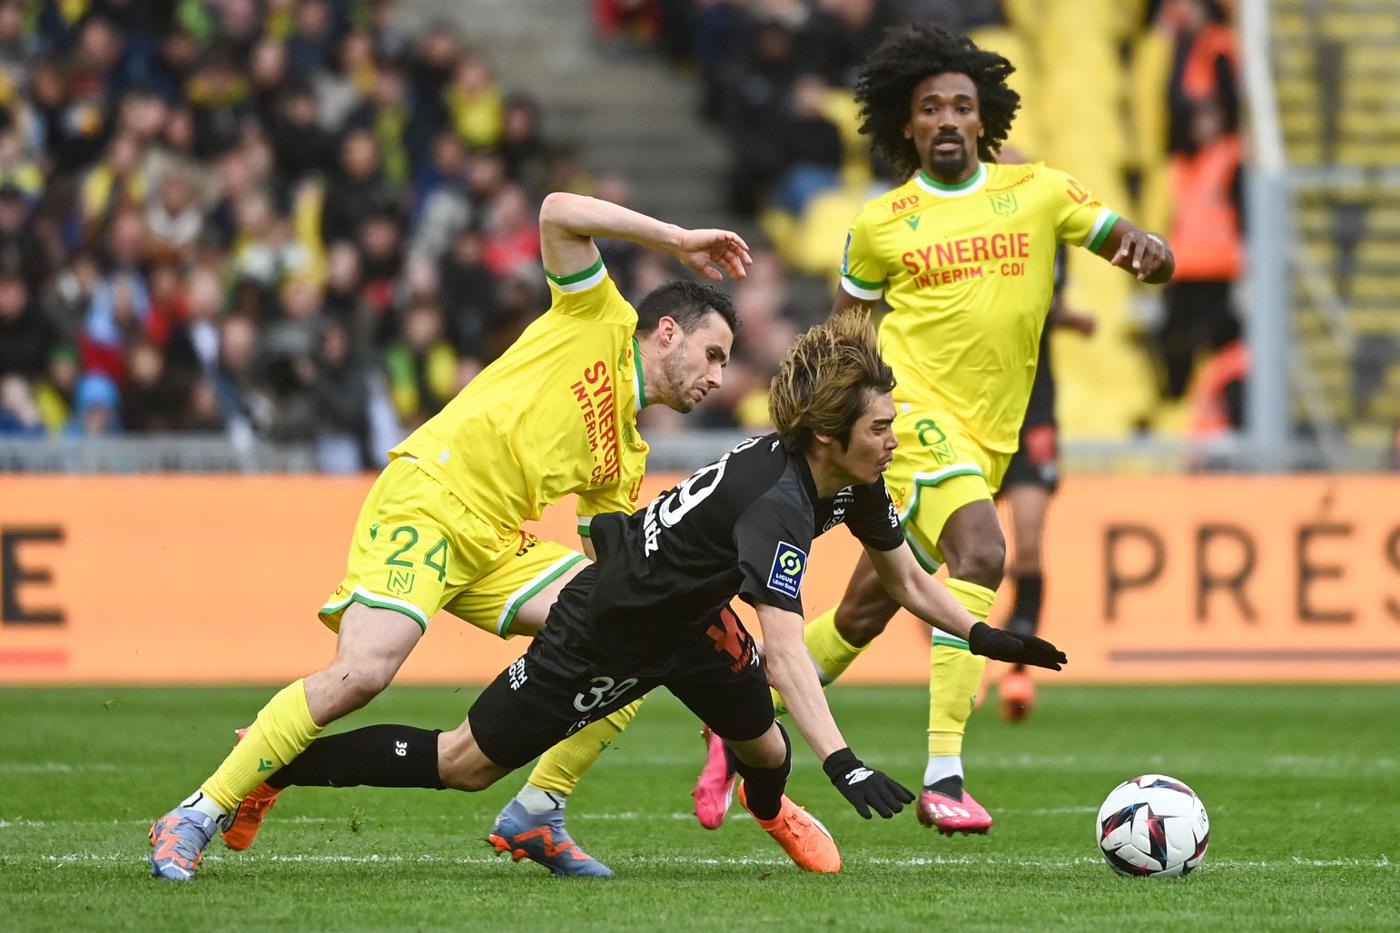 Nantes - Reims - 0:3. French Championship, 29th round. Match review, statistics